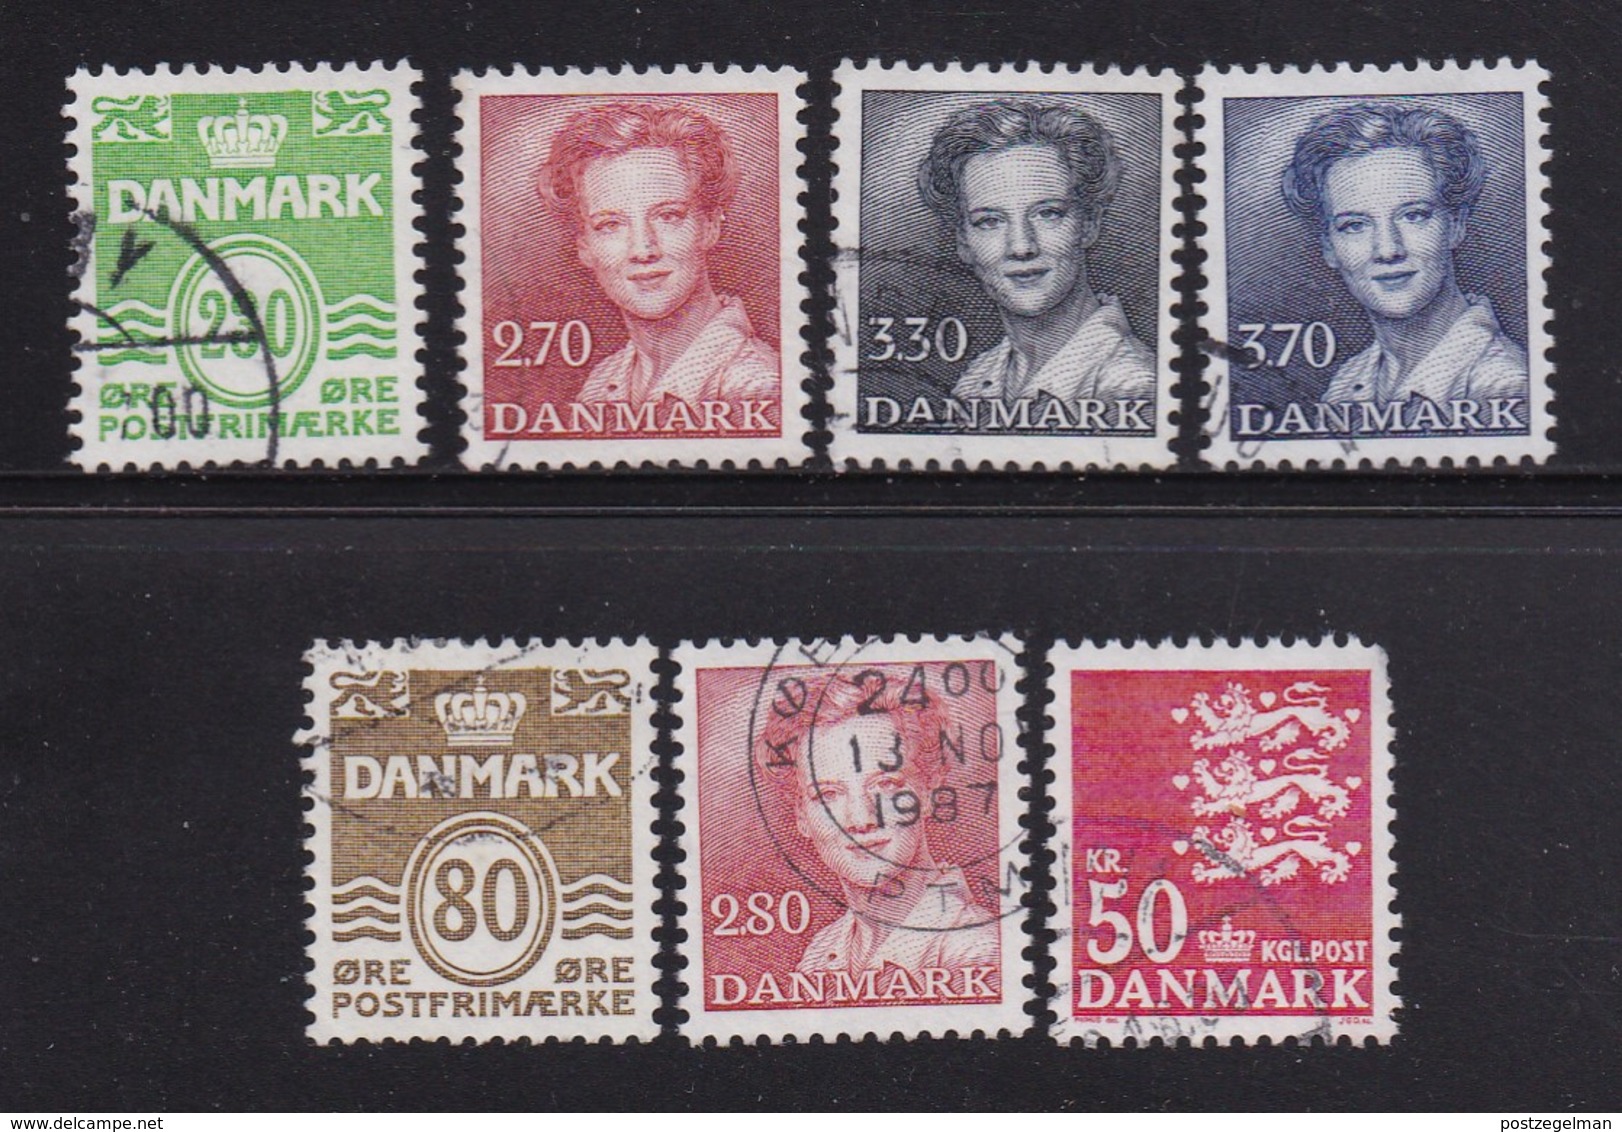 DENMARK, 1984, Used Stamp(s),   Definitives, MI 792=827, #10165, 7 Values - Used Stamps